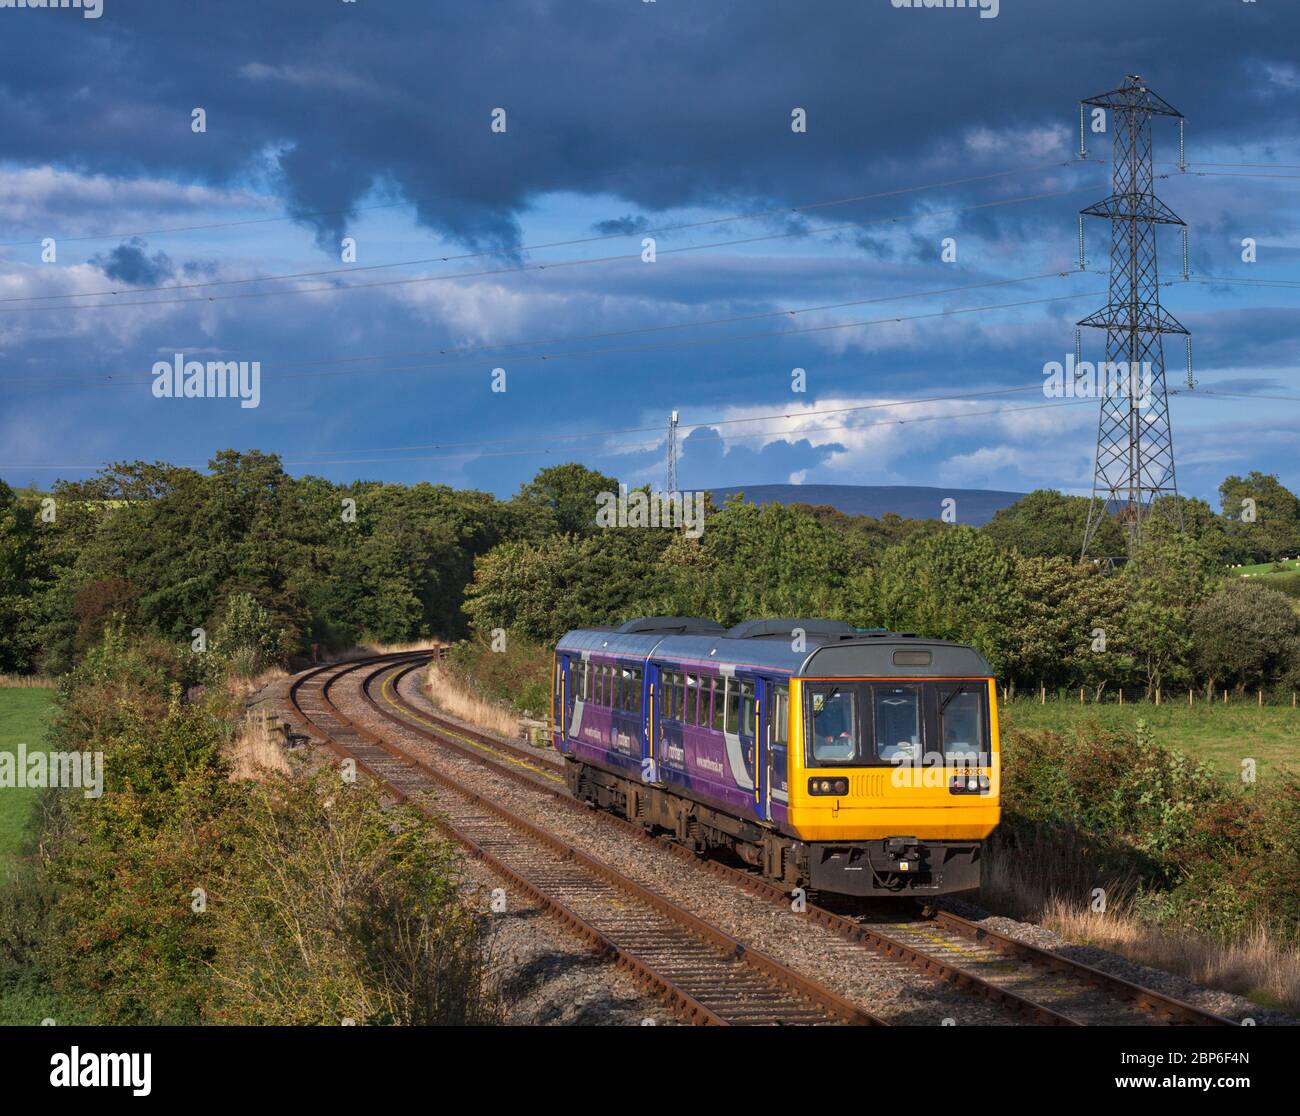 Northern rail class 142 pacer train 142093 on the scenic little north western railway line passing the countryside at Keerholme Stock Photo